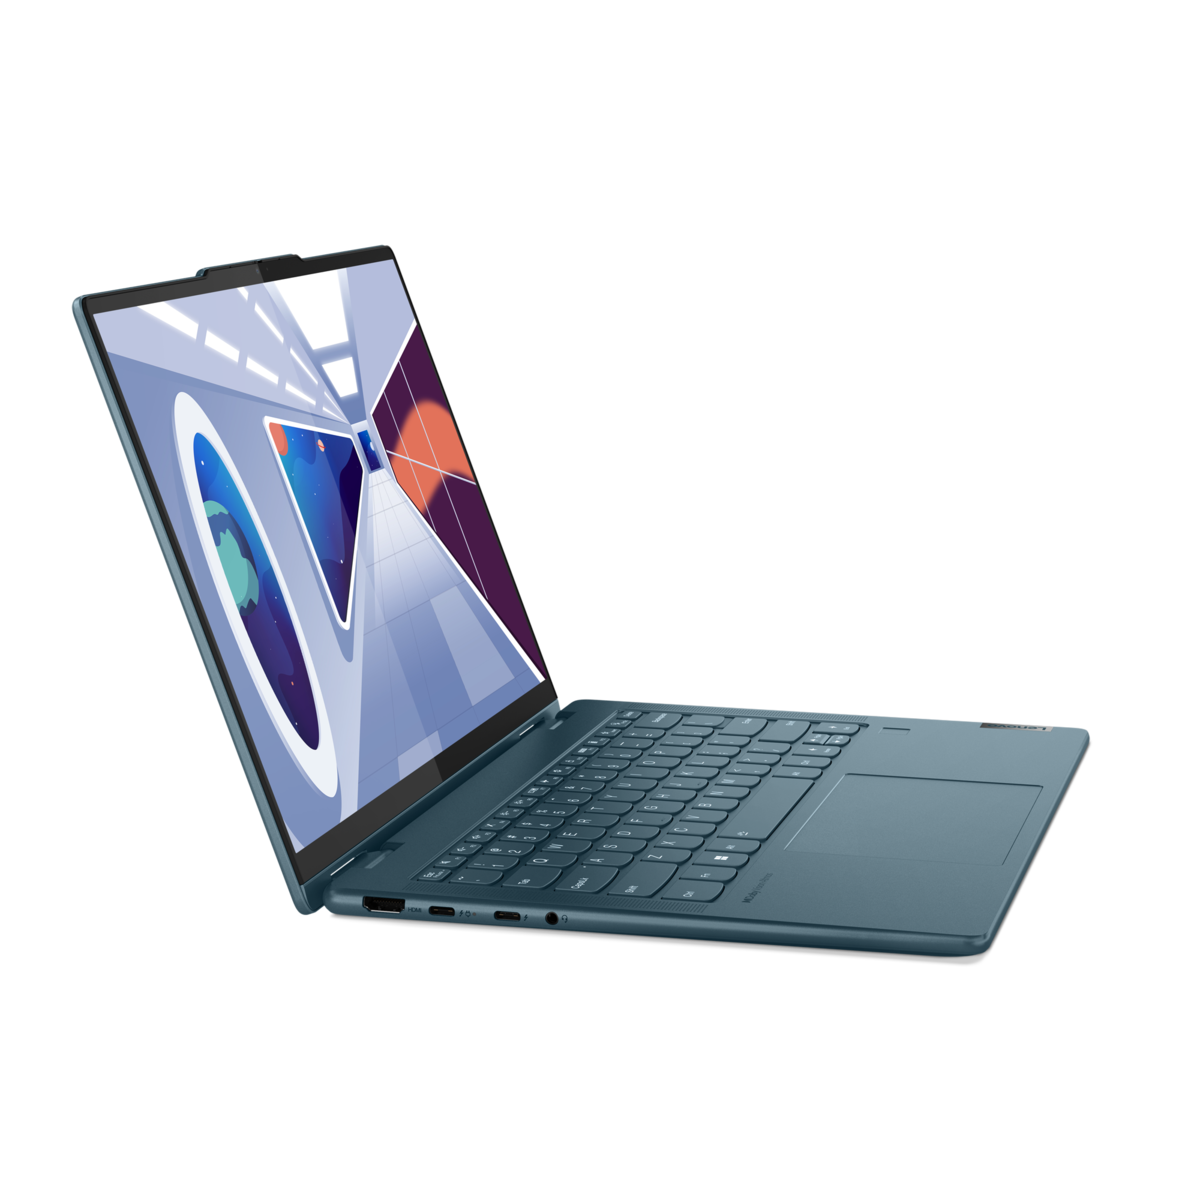 Lenovo Yoga Pro 7 and Pro 7i (14.5-inch, 8) are touted as new all